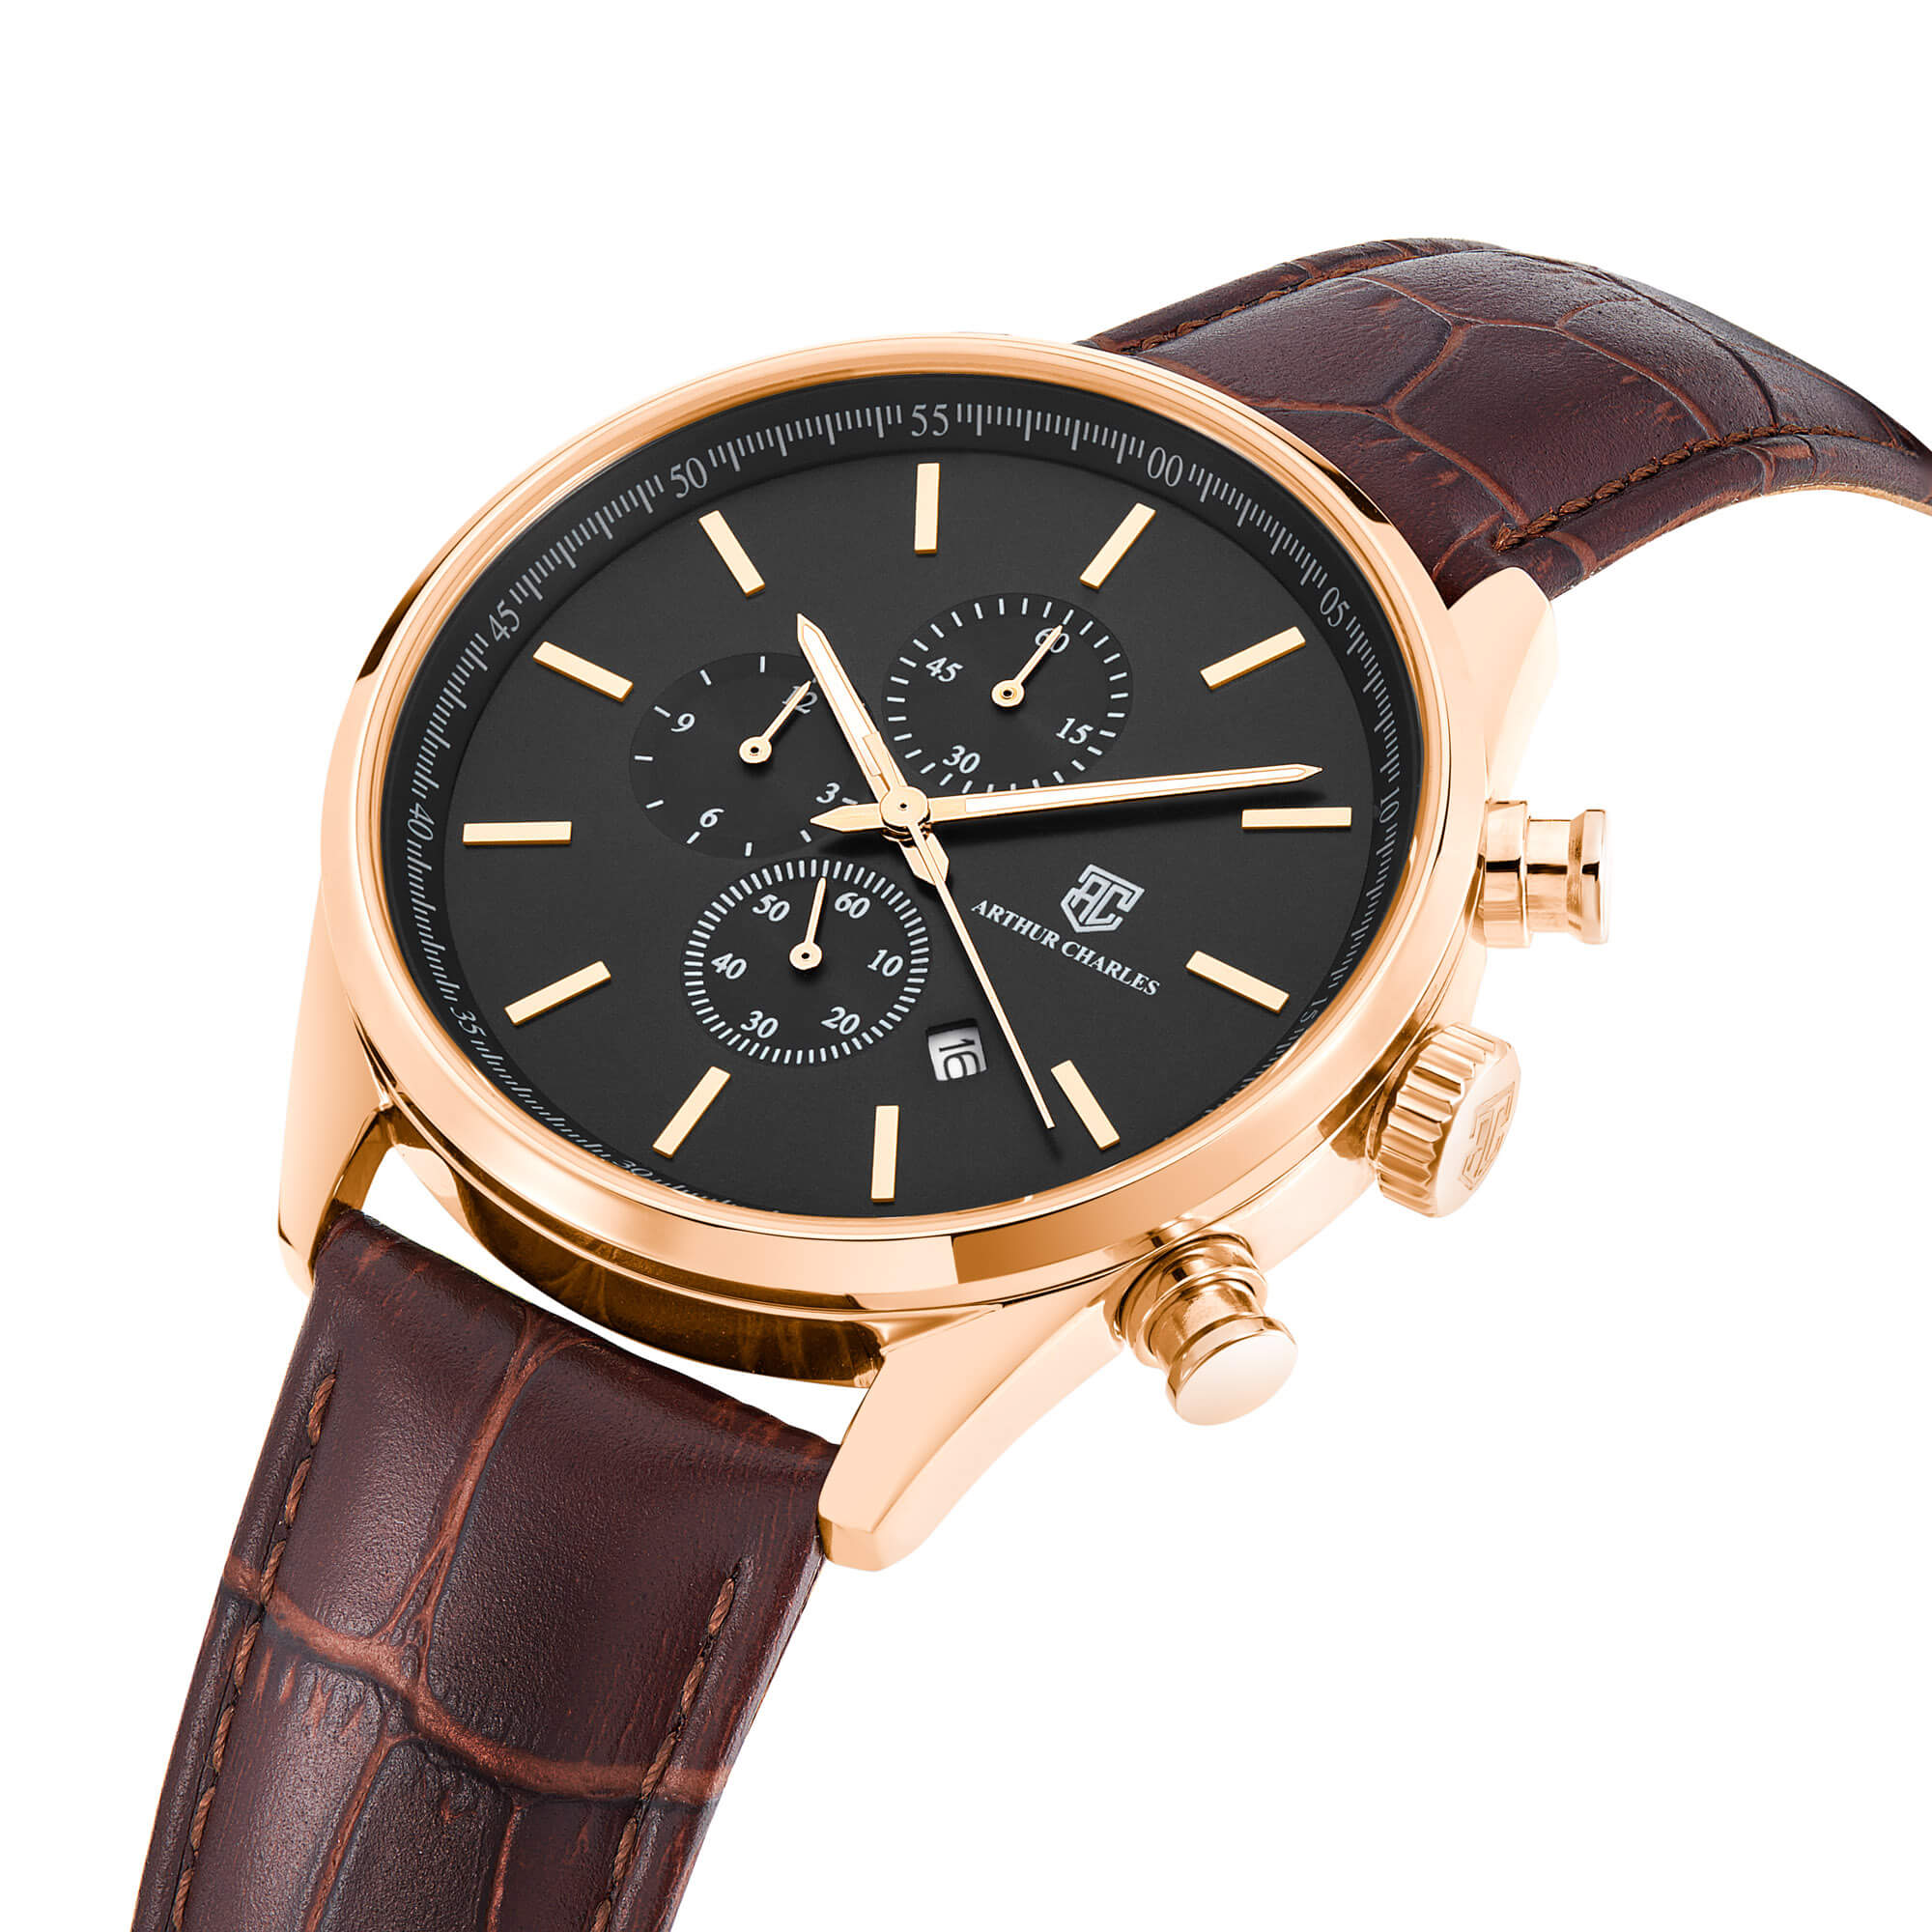 Side view of The Arthur Charles Gold Chrono Prestige Men's Watch. This watch has 3 chronograph hands and two pushers on the side to set time. This watch is accompanied with a brown leather strap. 